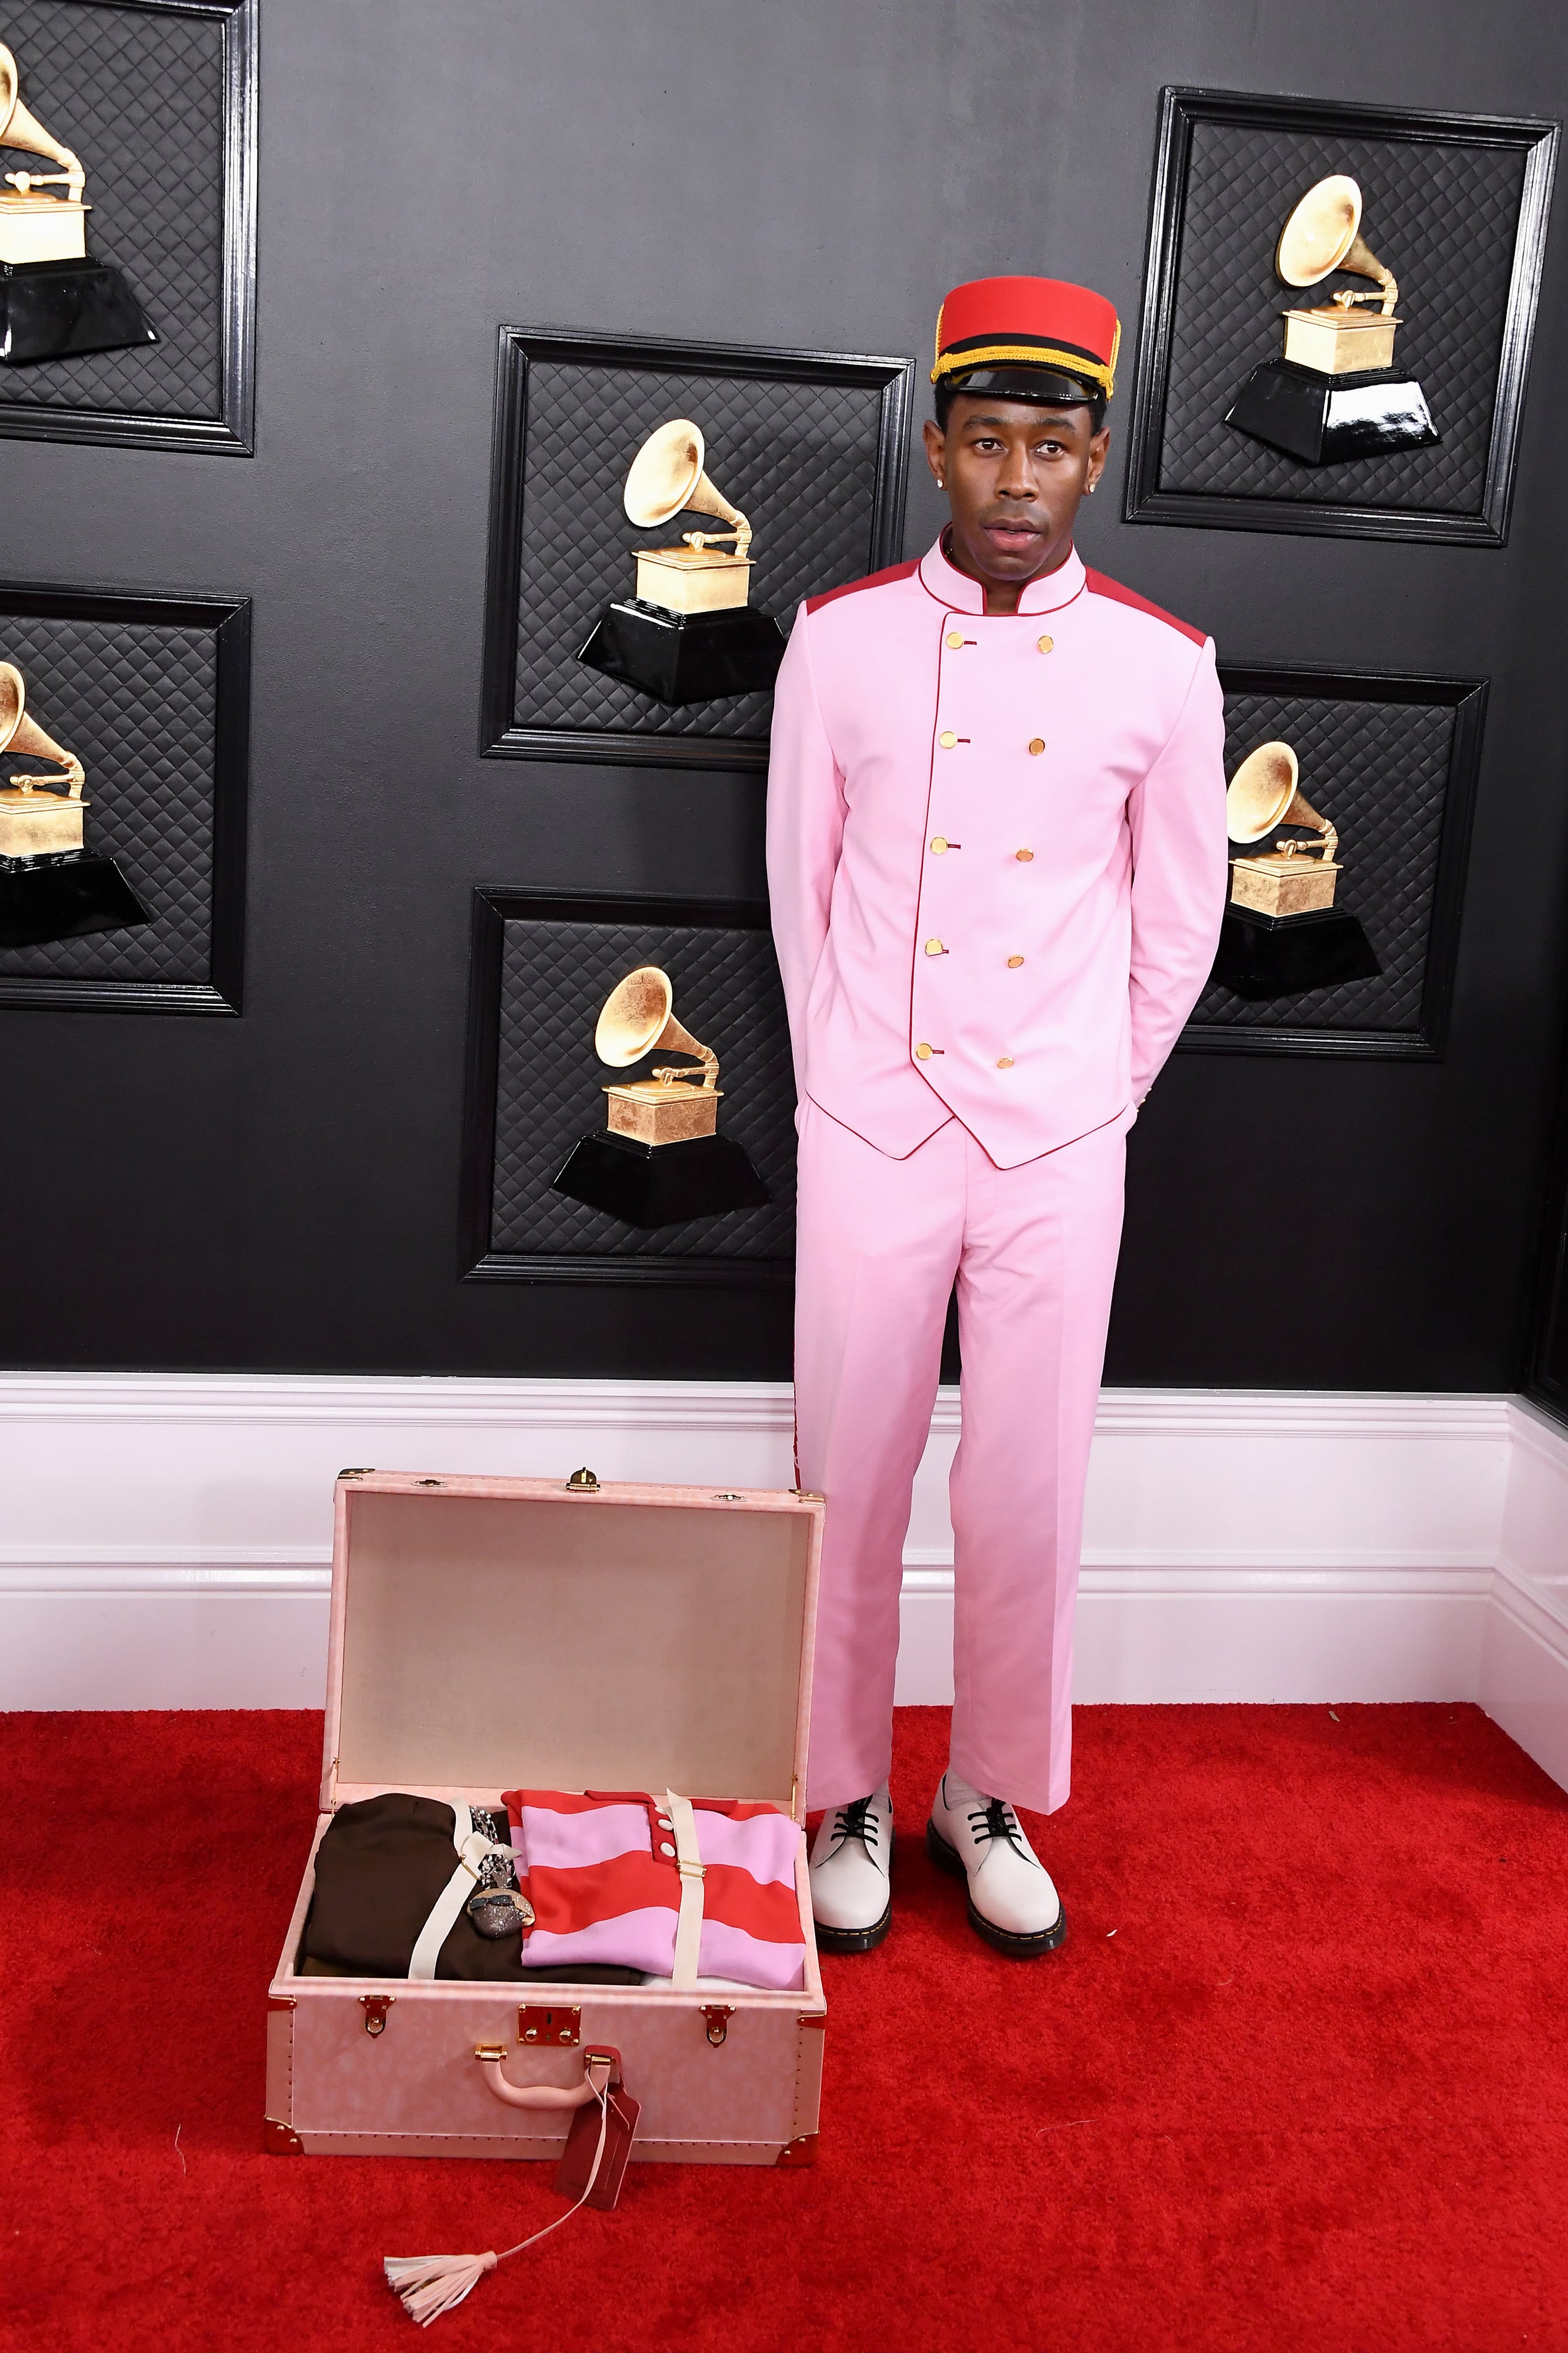 Tyler the Creator Wears Pink Bellhop Outfit to Grammys 2020: Photo 4423336, 2020 Grammys, Grammys, Tyler the Creator Photos